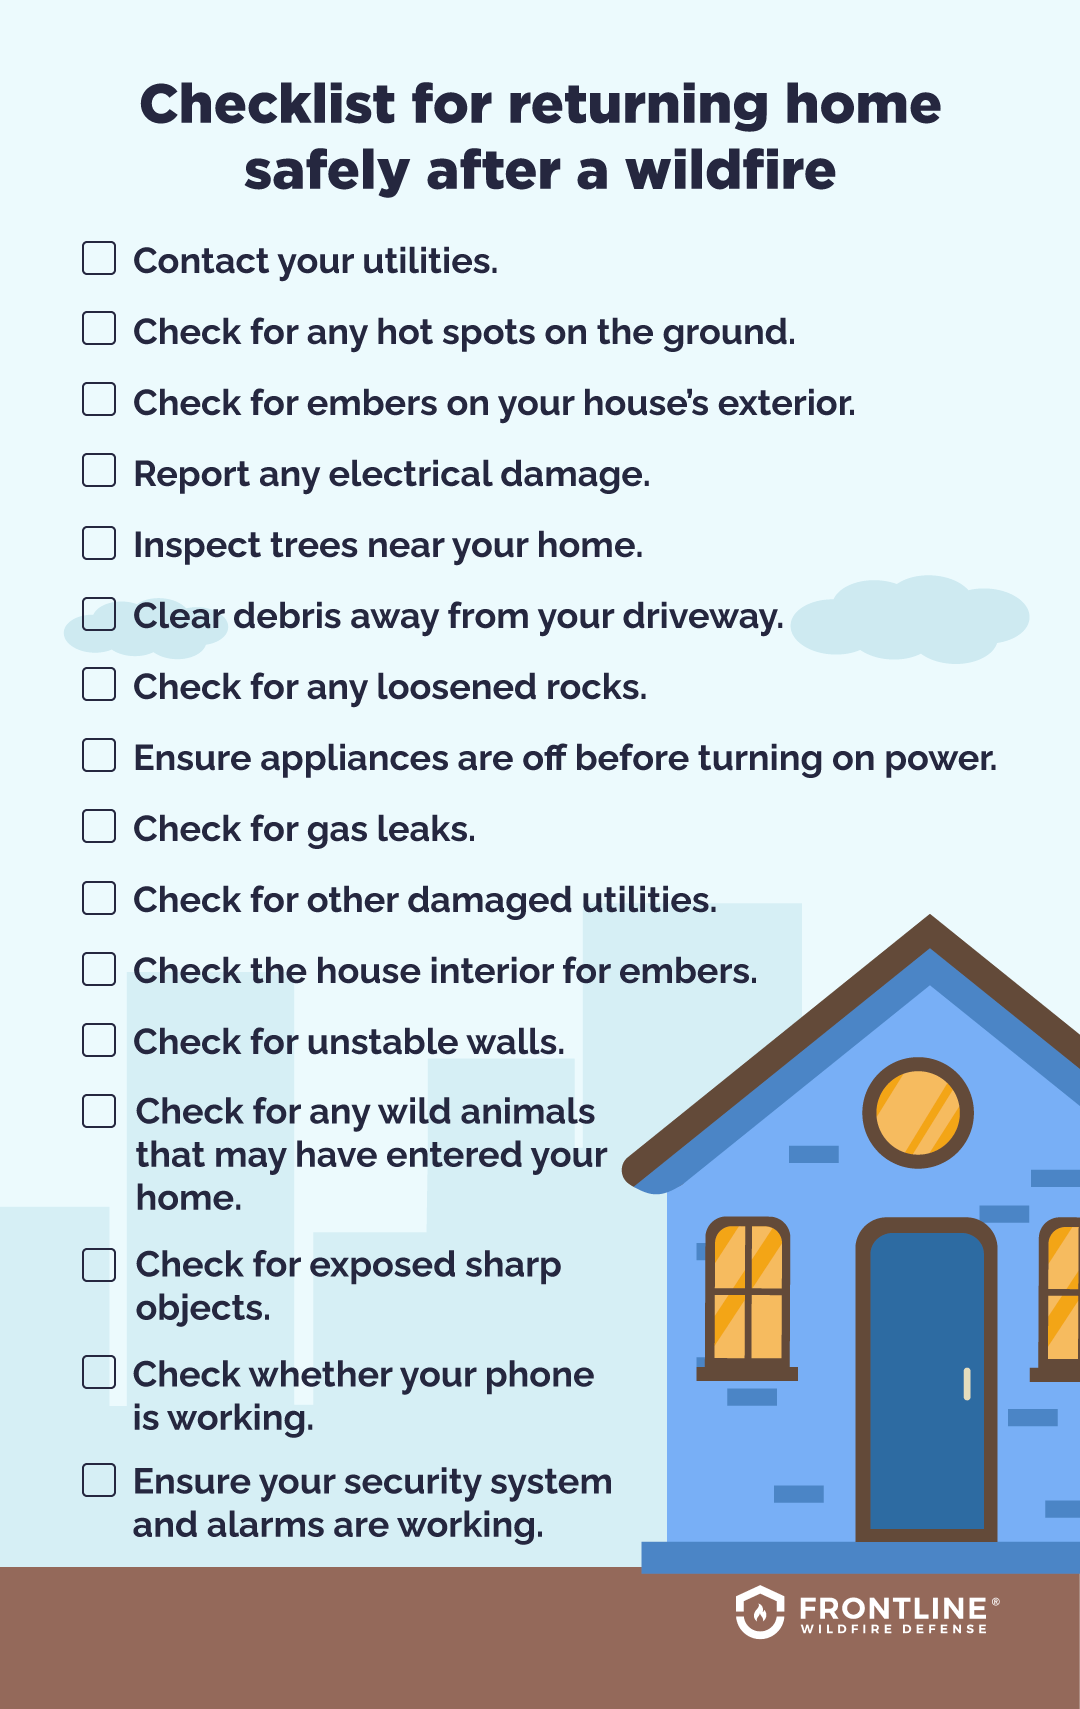 Checklist for returning home after a wildfire.